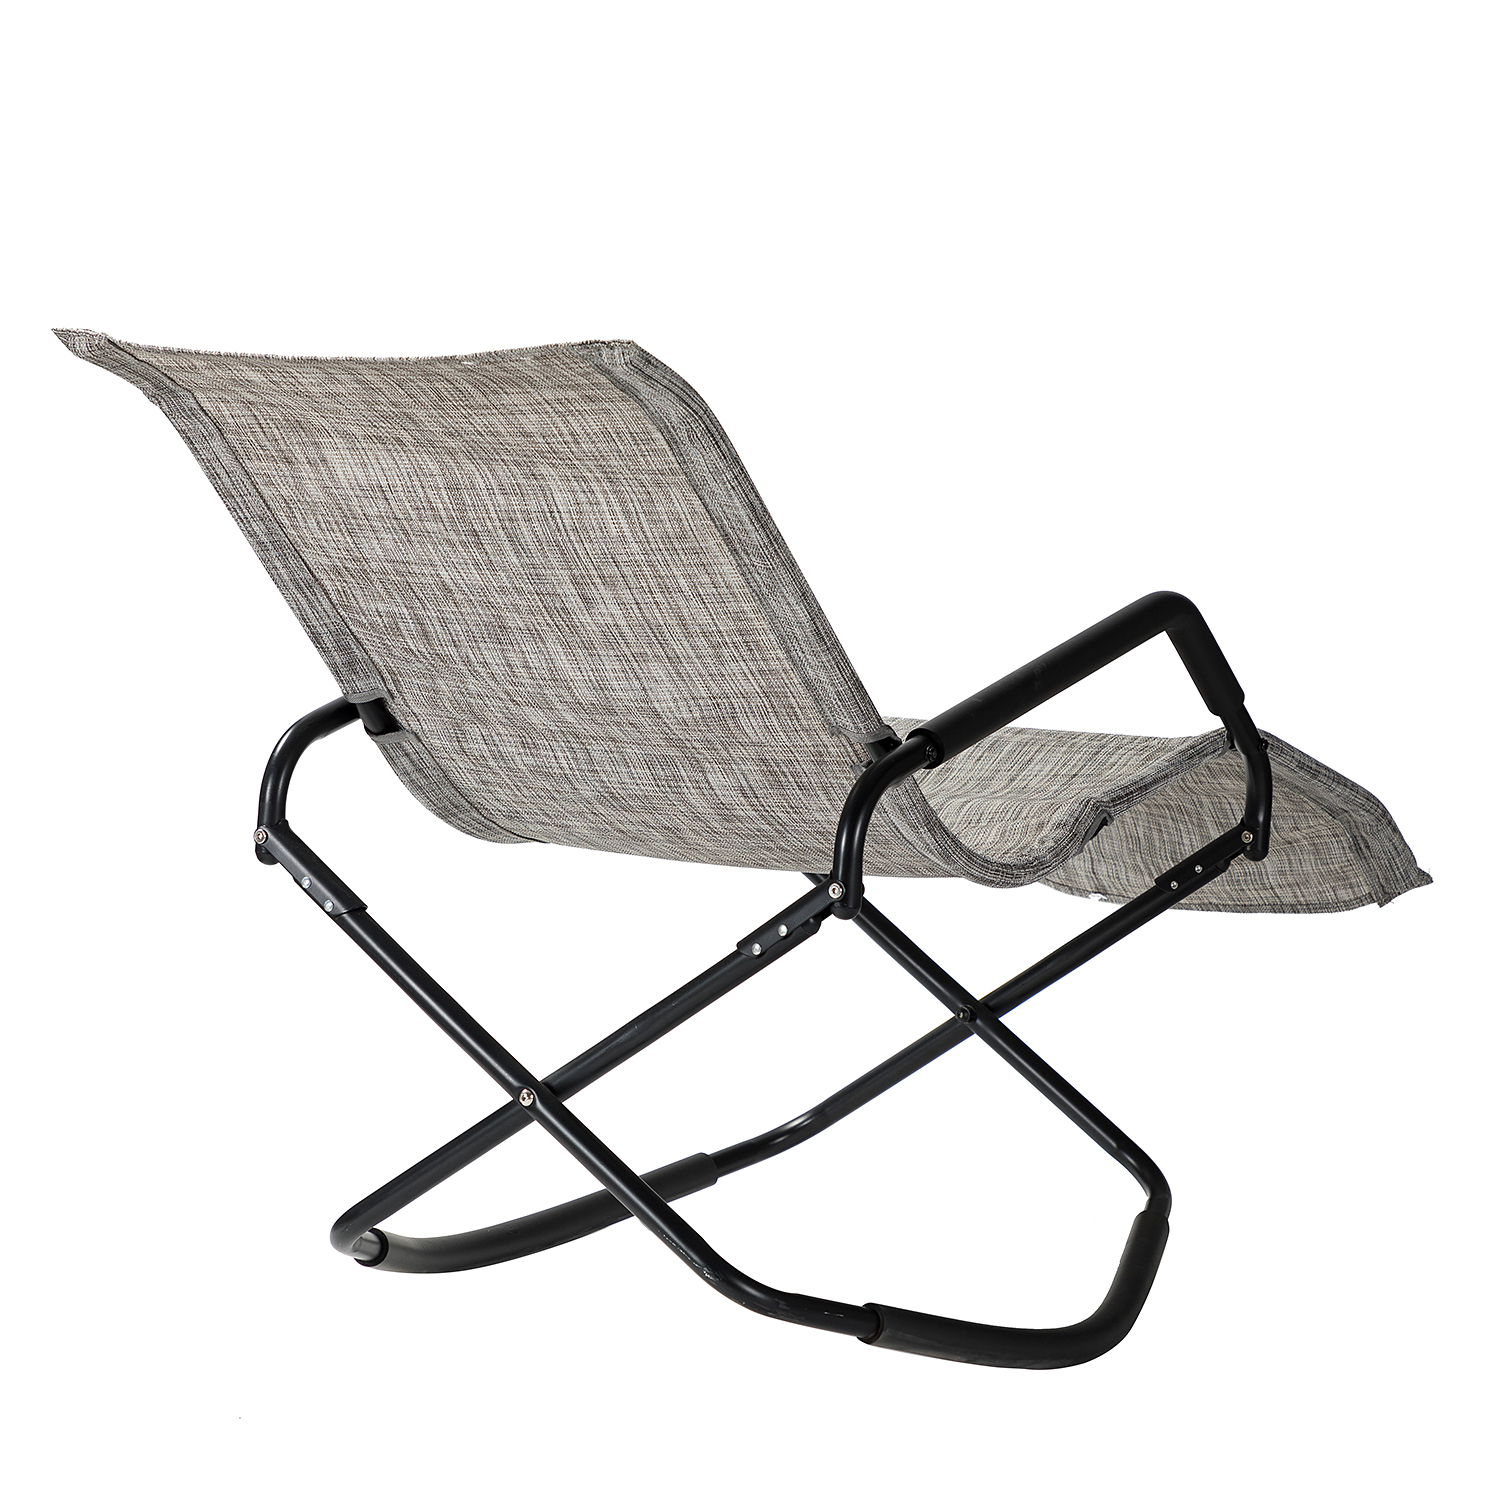 Camping Rocking Chair, Outdoor Folding Lounge Chaise Chair, Portable Beach Chair with Armrests, Folding Lounge Chair, Patio Reclining Lounge Chair for Pool, Garden, Lawn, Deck, D7847 - image 3 of 10